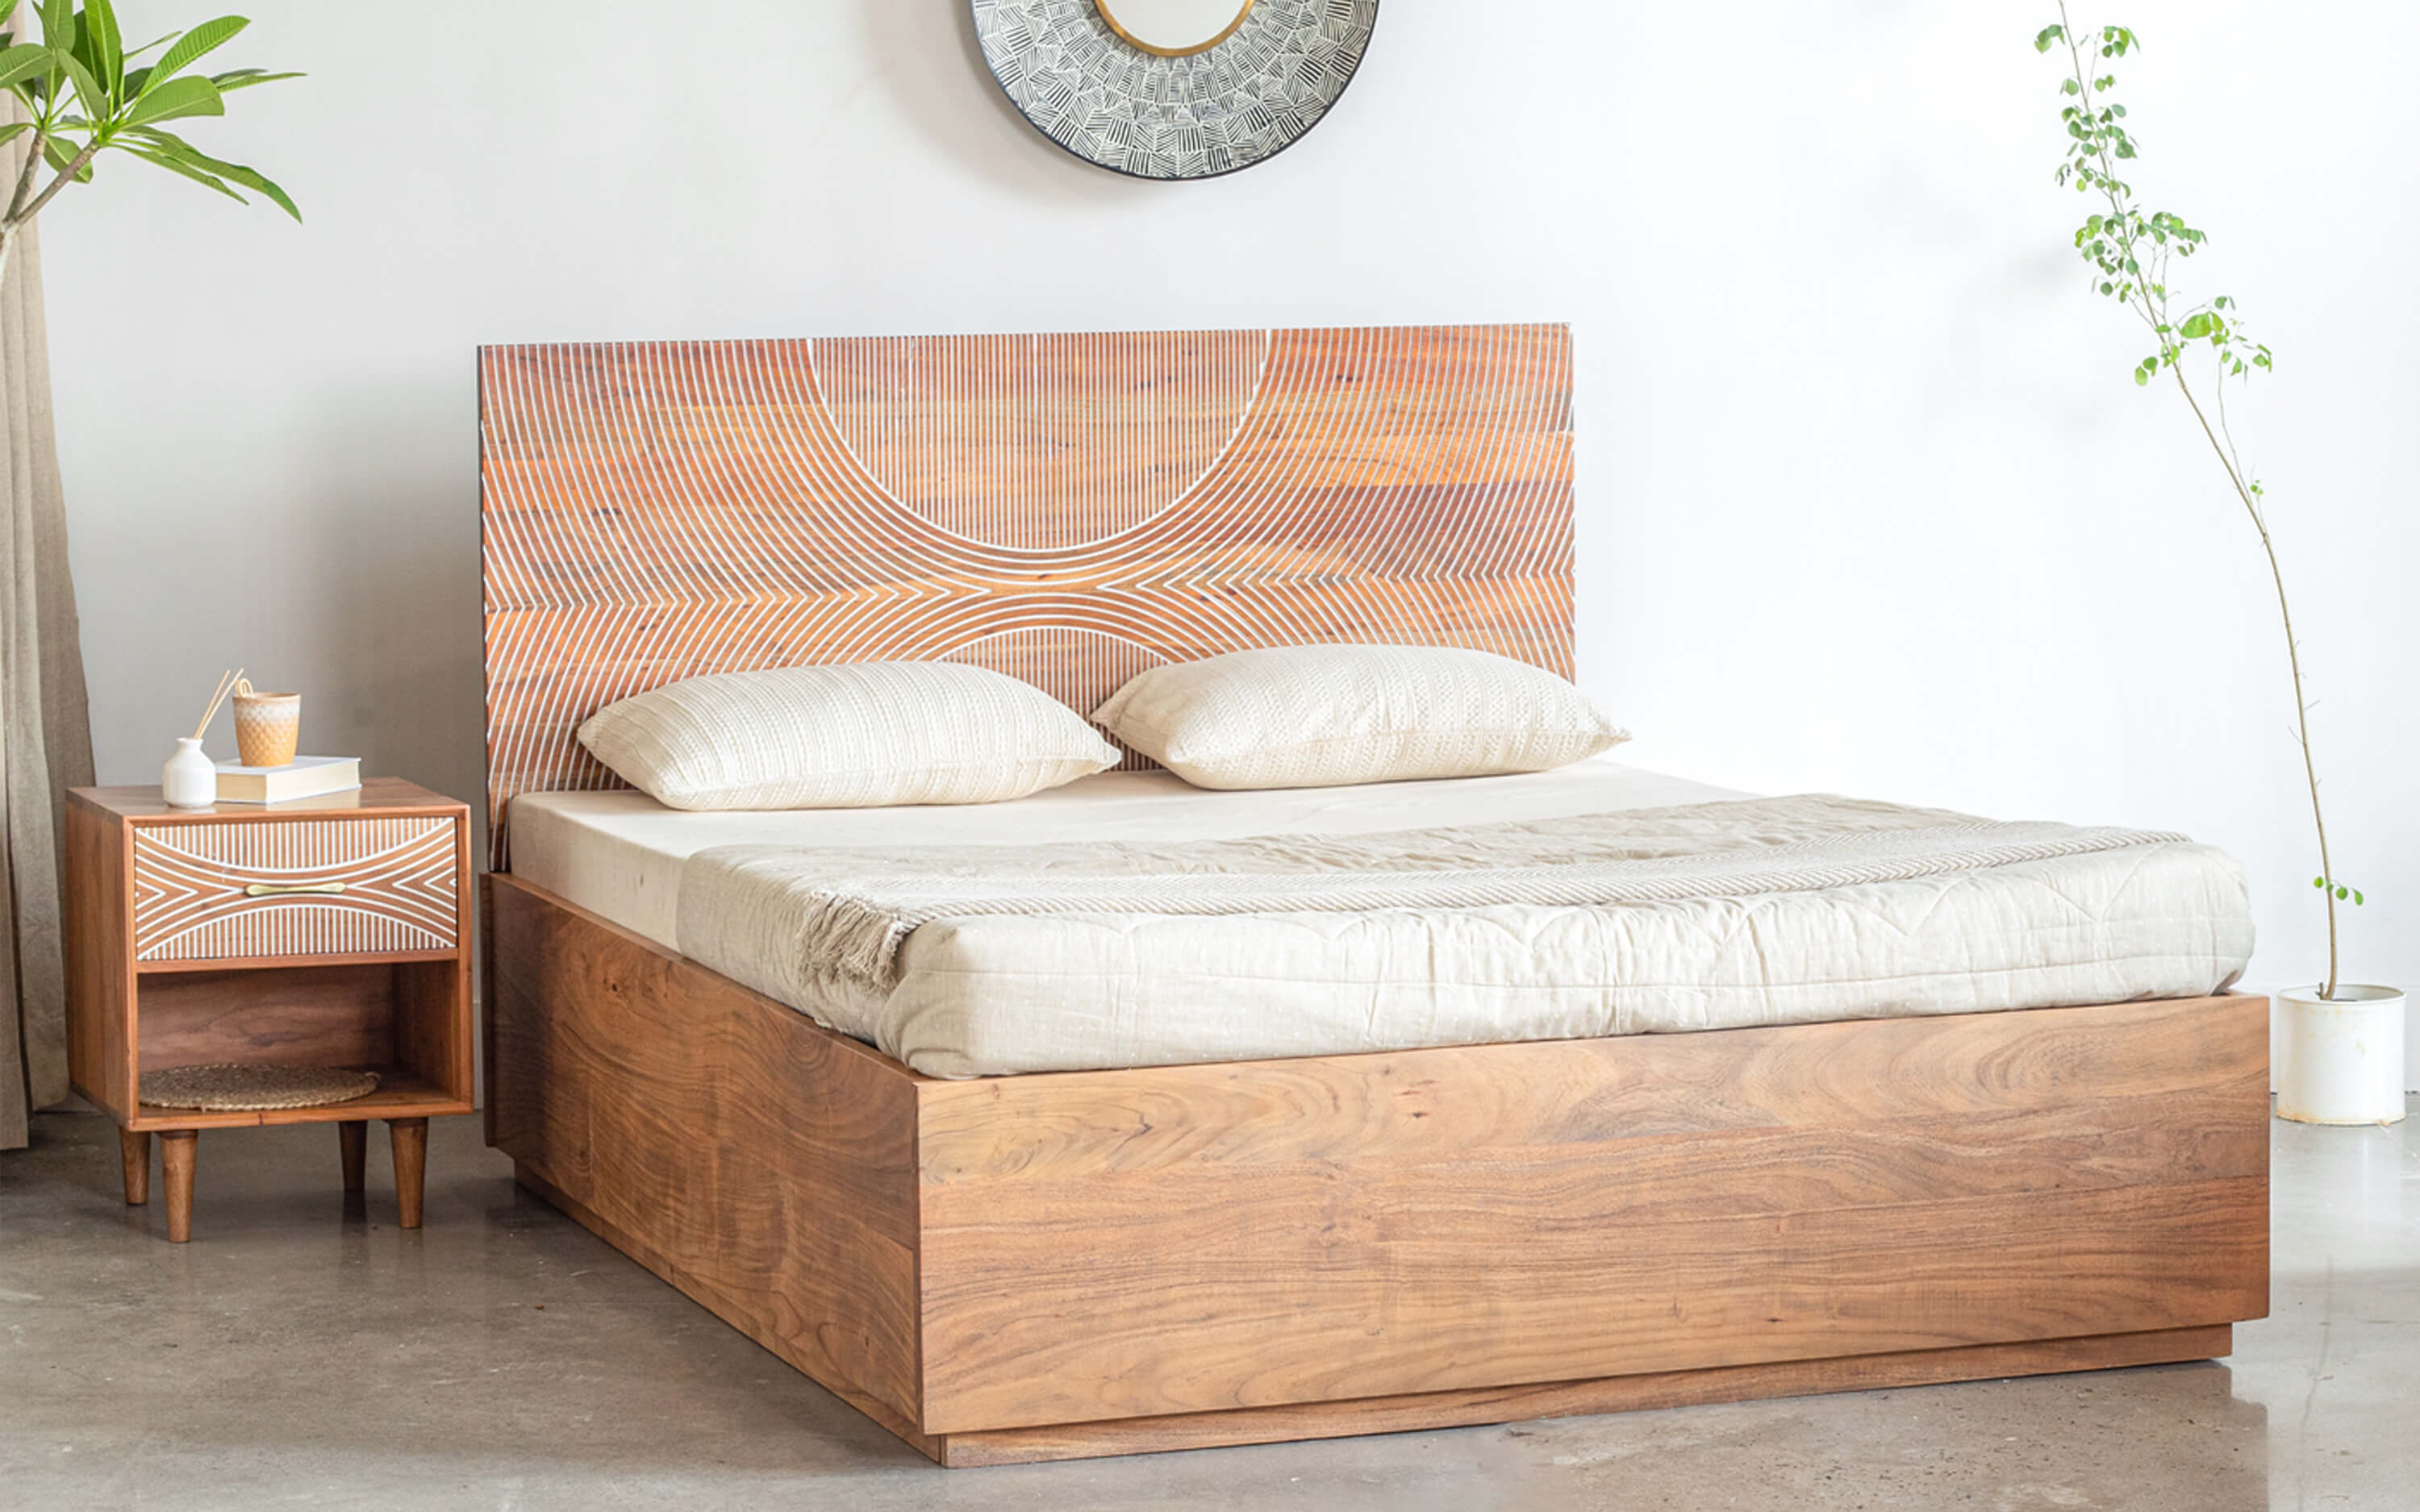 Intricate laser-cut wooden headboard with a repeating pattern, combining modern technology with traditional wood for a textured look.